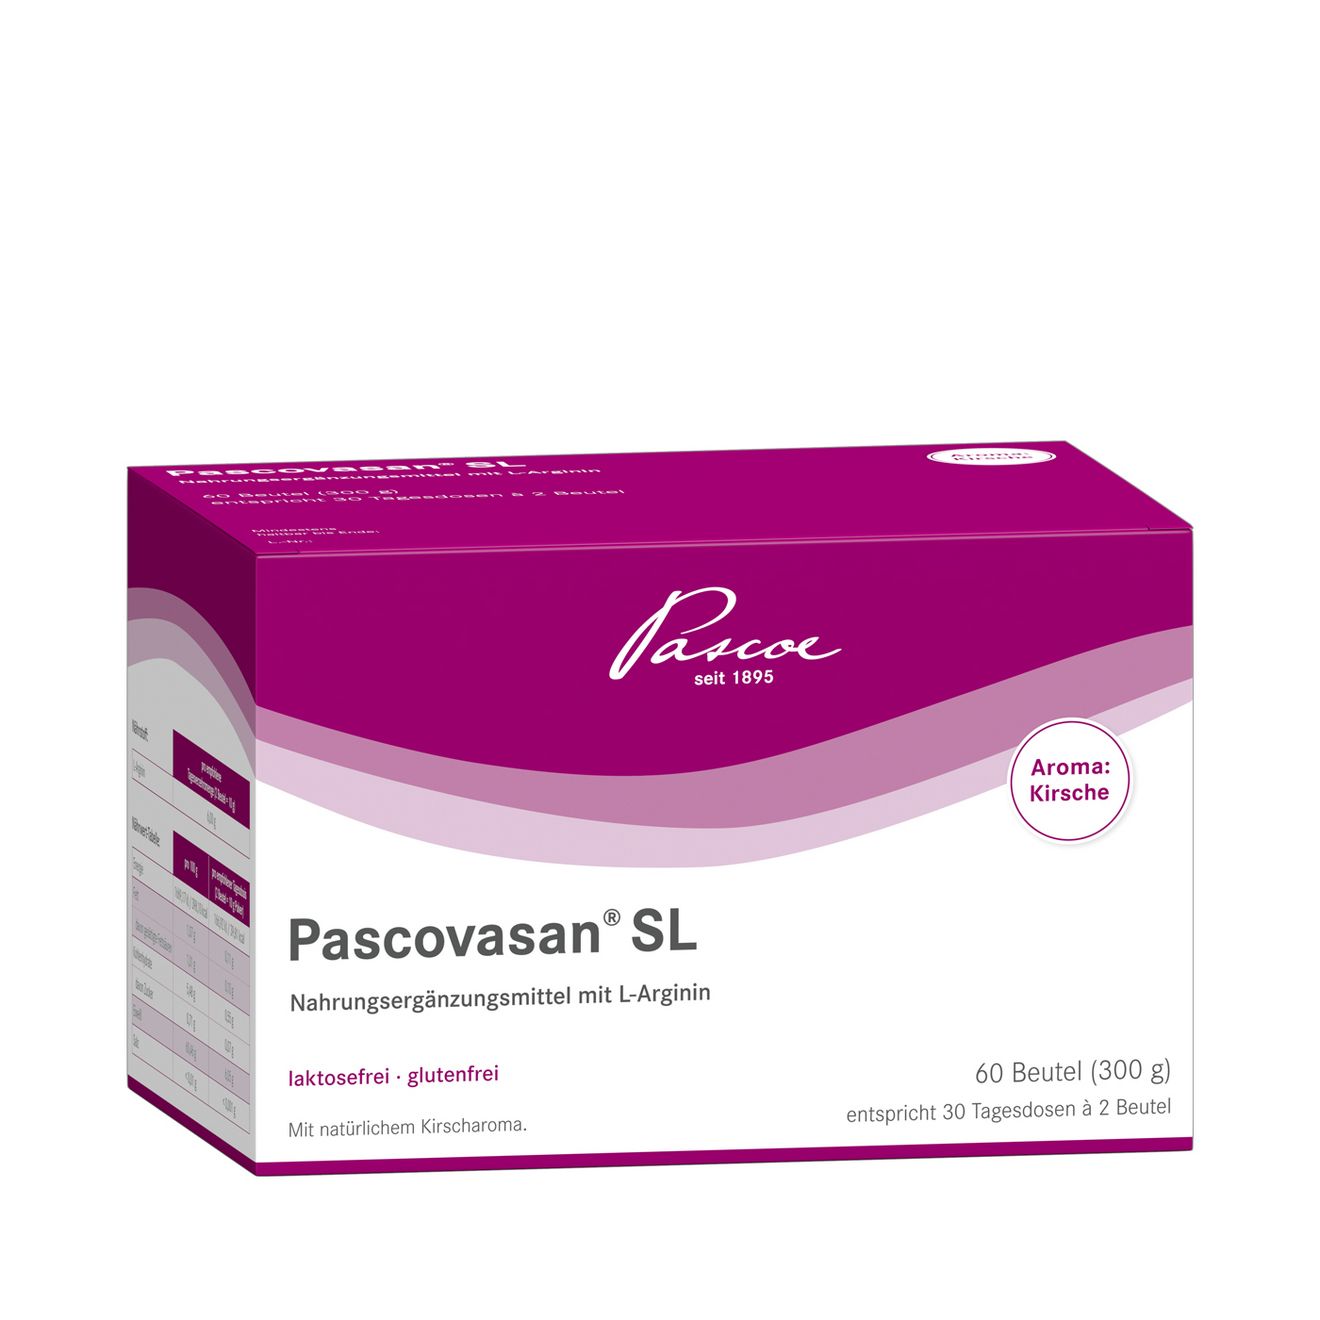 [Translate to Englisch:] Pascovasan® SL